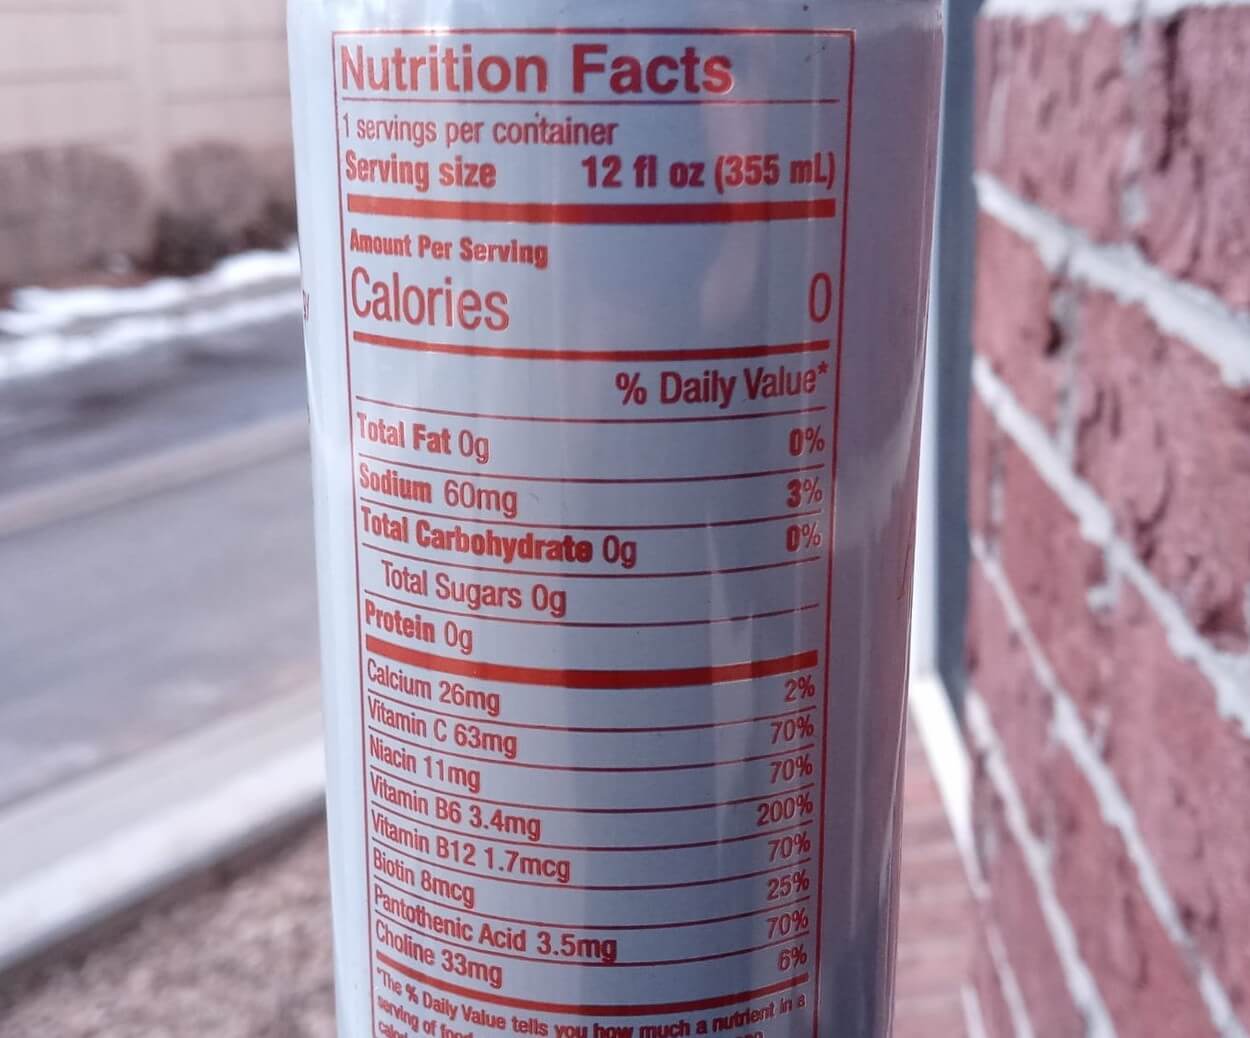 Nutritional Facts of Aspire at the back of the can